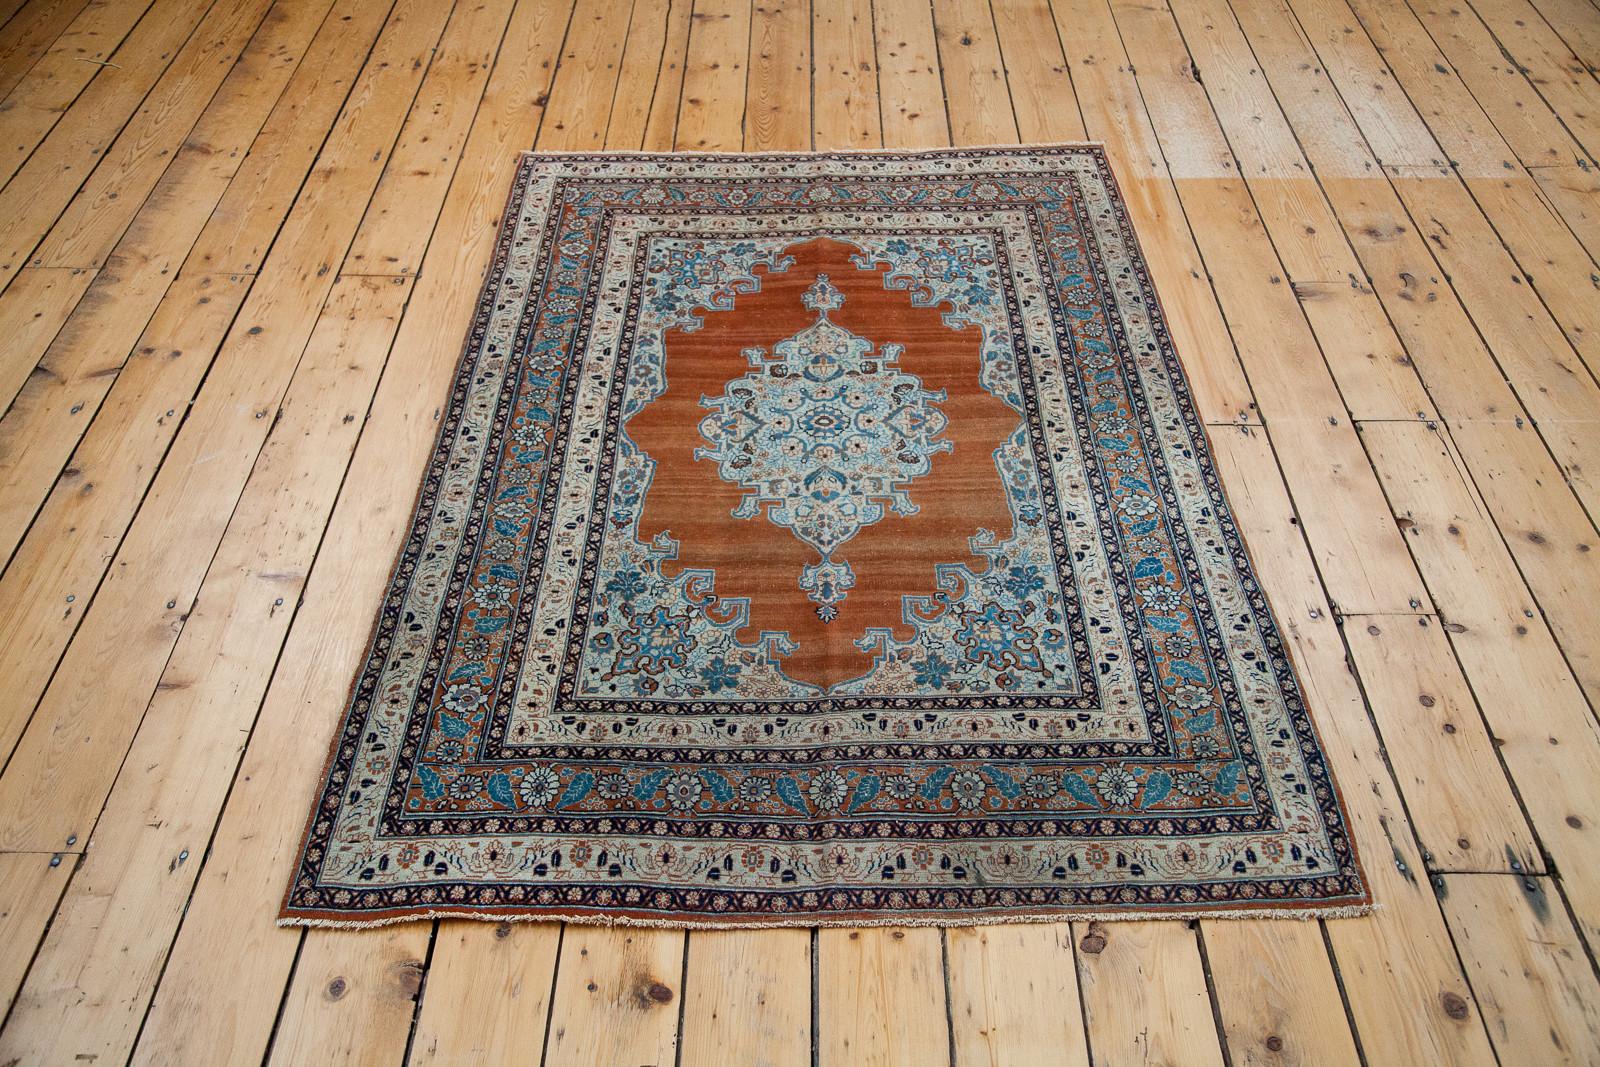 Fine antique Tabriz area rug. Gorgeous rust orange field with wonderful soft saffron and aqua blue highlights throughout. Amazing delicate outlines and intricate details: A prime example of a workshop rug with unique and artistic merit with nuances